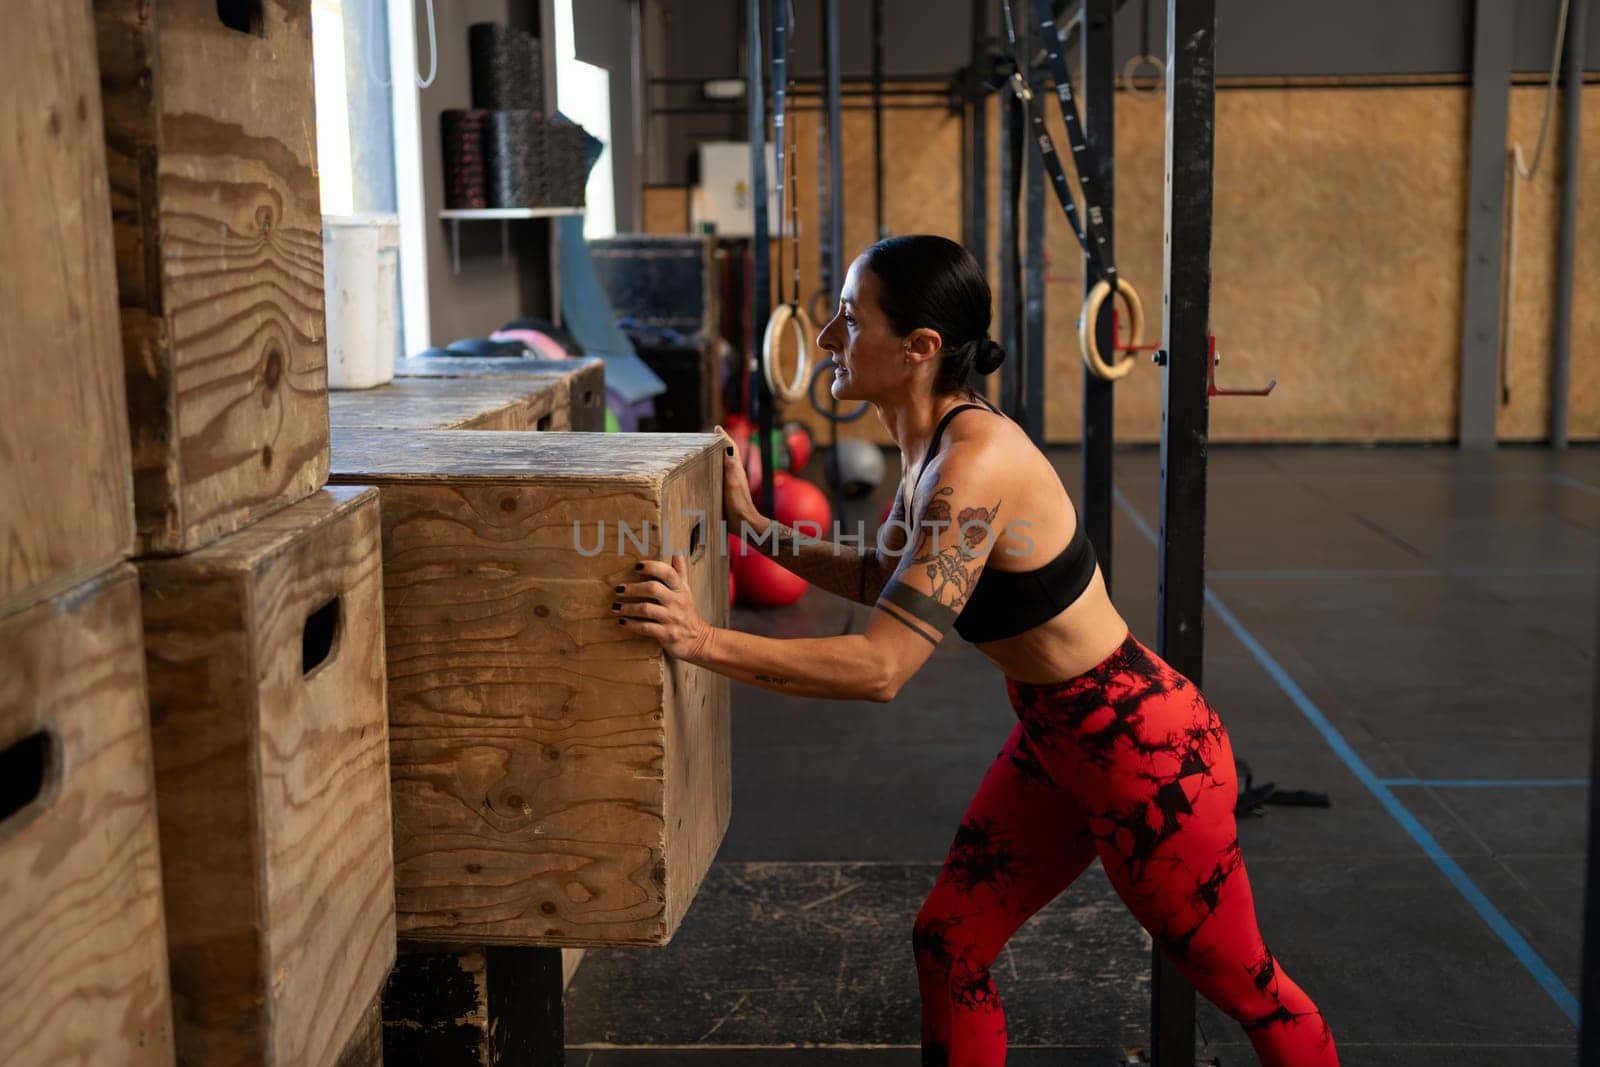 Sportive woman placing boxes in a cross training gym to maintain order